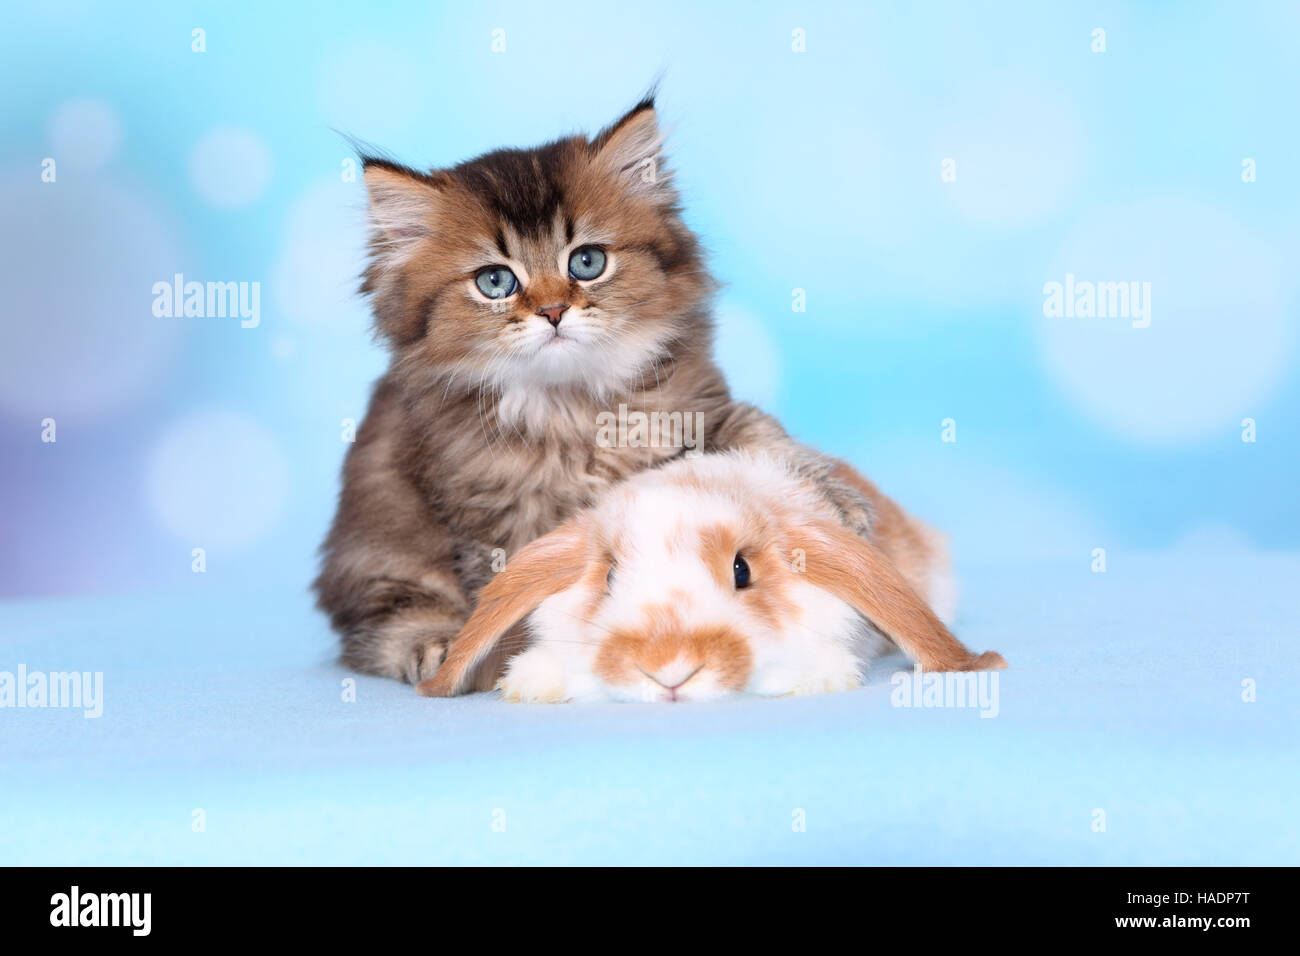 British Longhair and Dwarf lop-eared rabbit. Kitten (8 weeks old) and bunny on a light blue blanket. Studio picture against a blue background Stock Photo